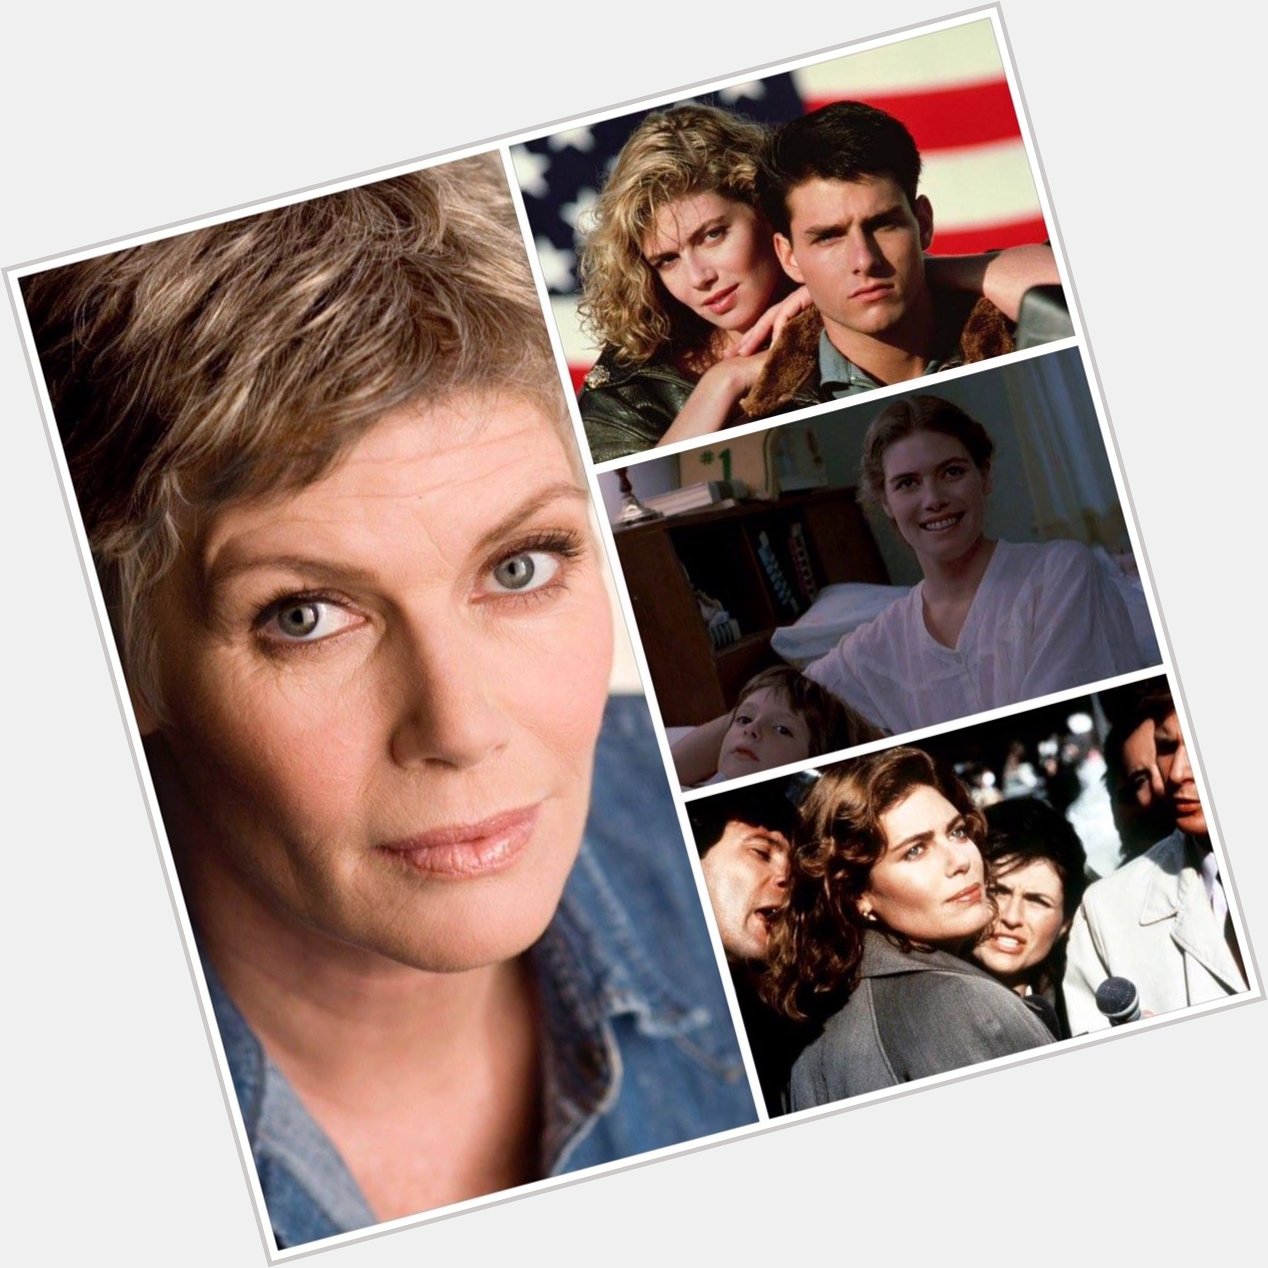 Happy birthday to actress Kelly McGillis, a real favorite of mine from her movies in the 1980s. 